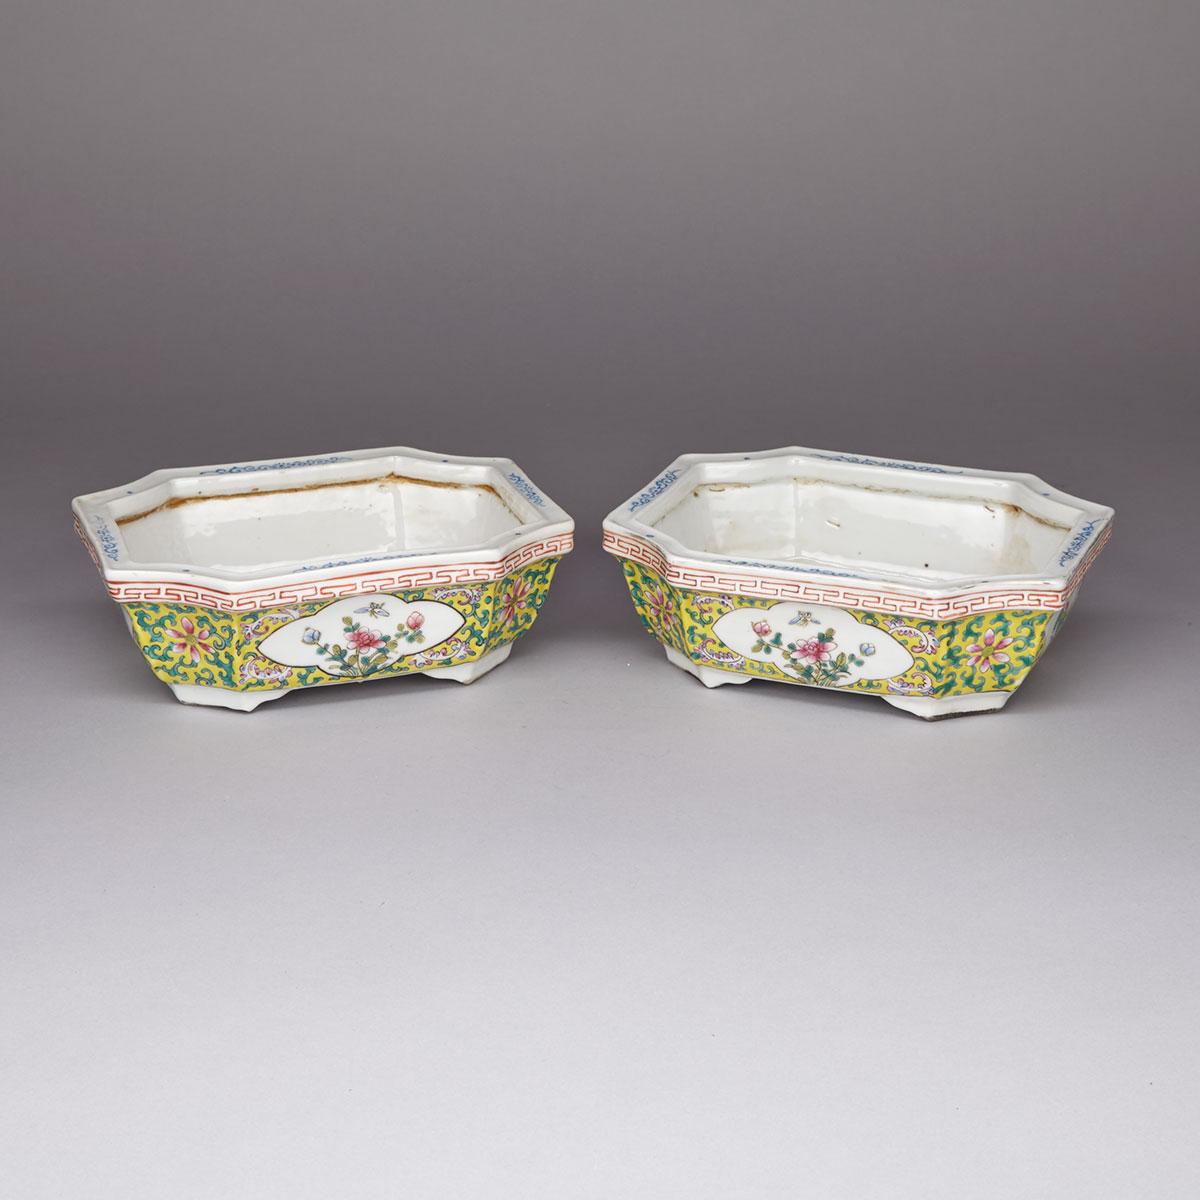 Pair of Famille Rose Planters